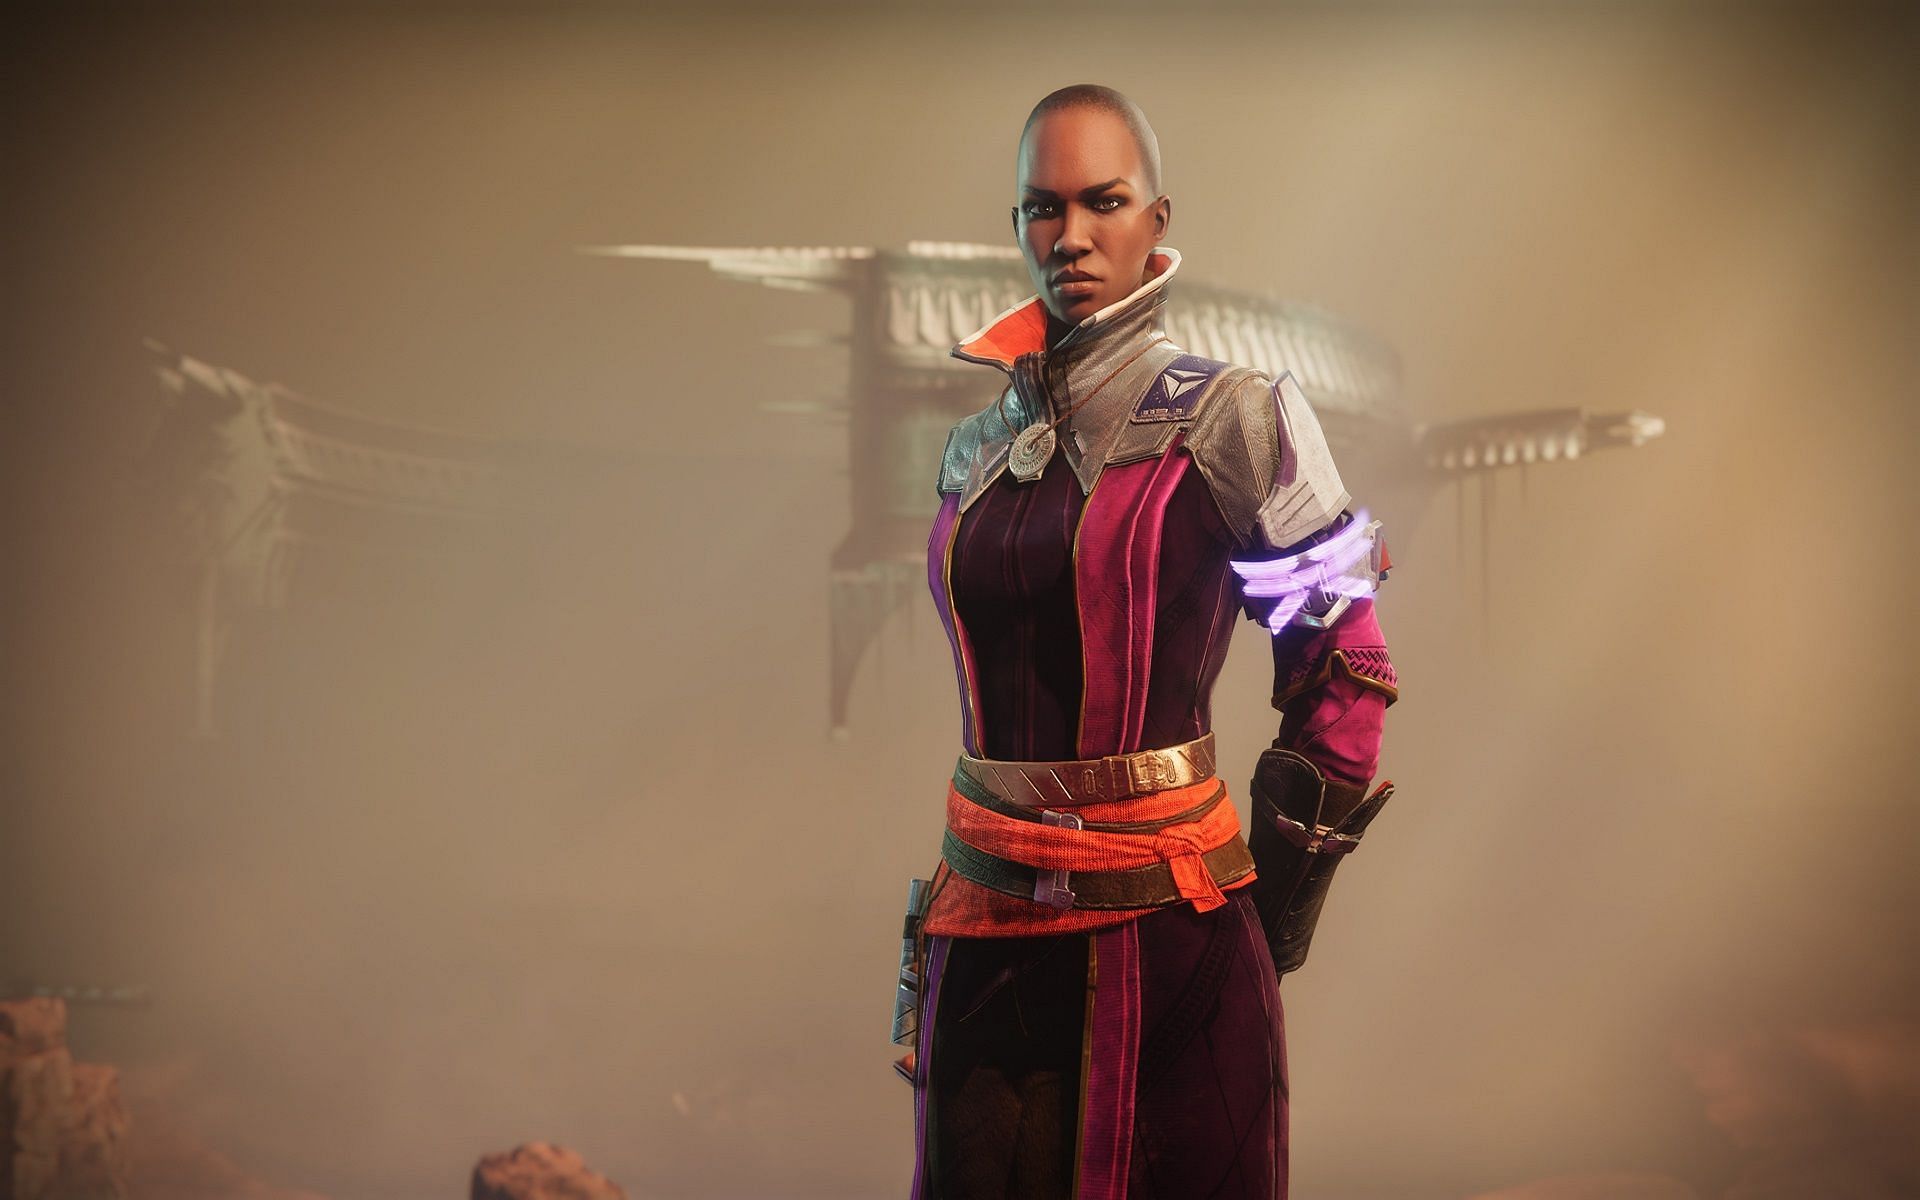 Speaking with Ikora directs you to crafting (Image via Bungie)